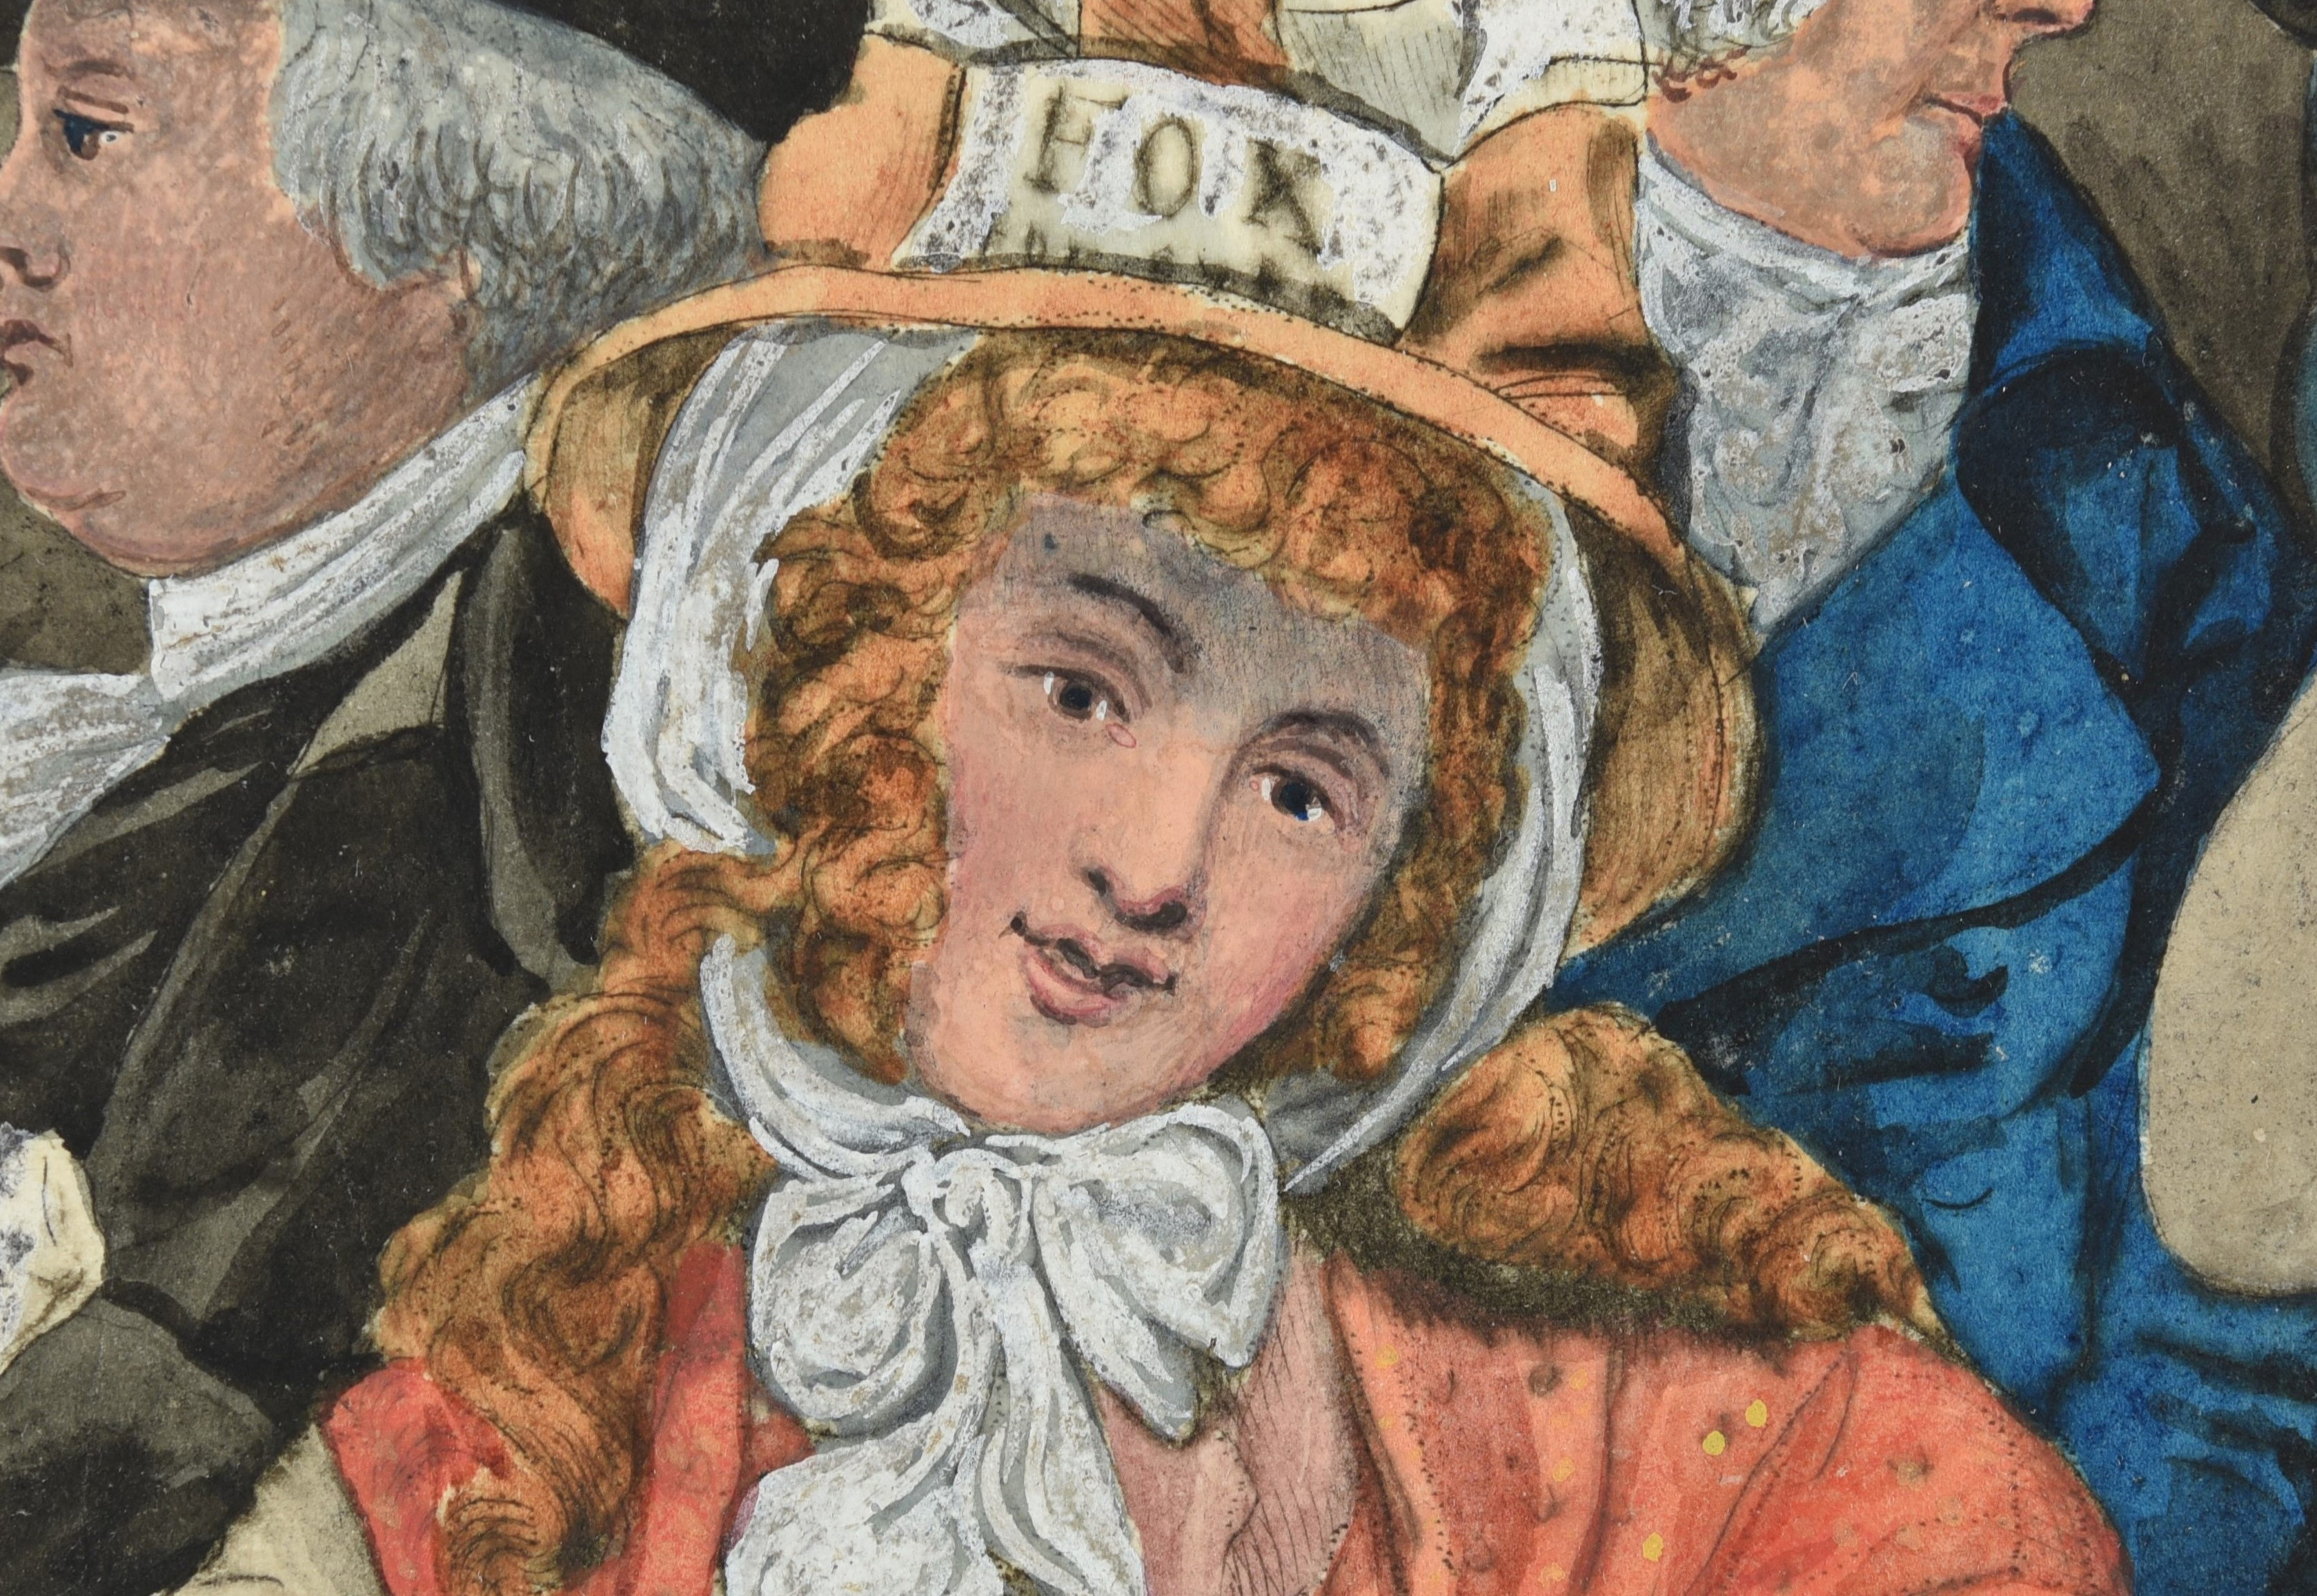 A woman's face. She wears a peach hat and peach coloured shawl. Her face is clearer after conservation treatment.